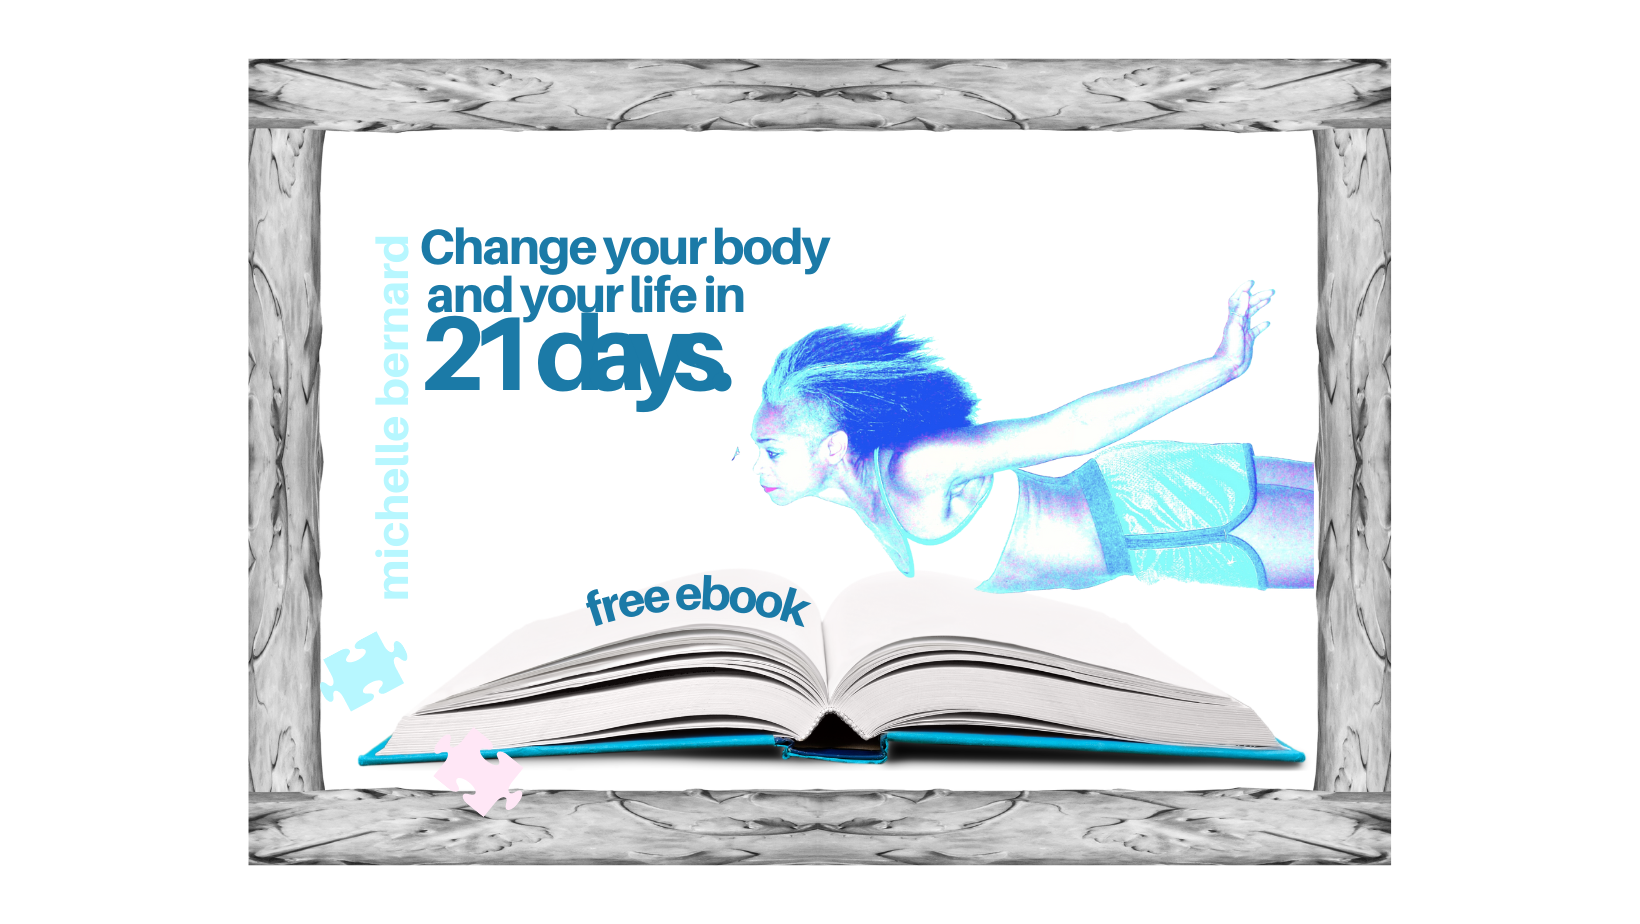 Change your body and your life in 21 days: a free ebook